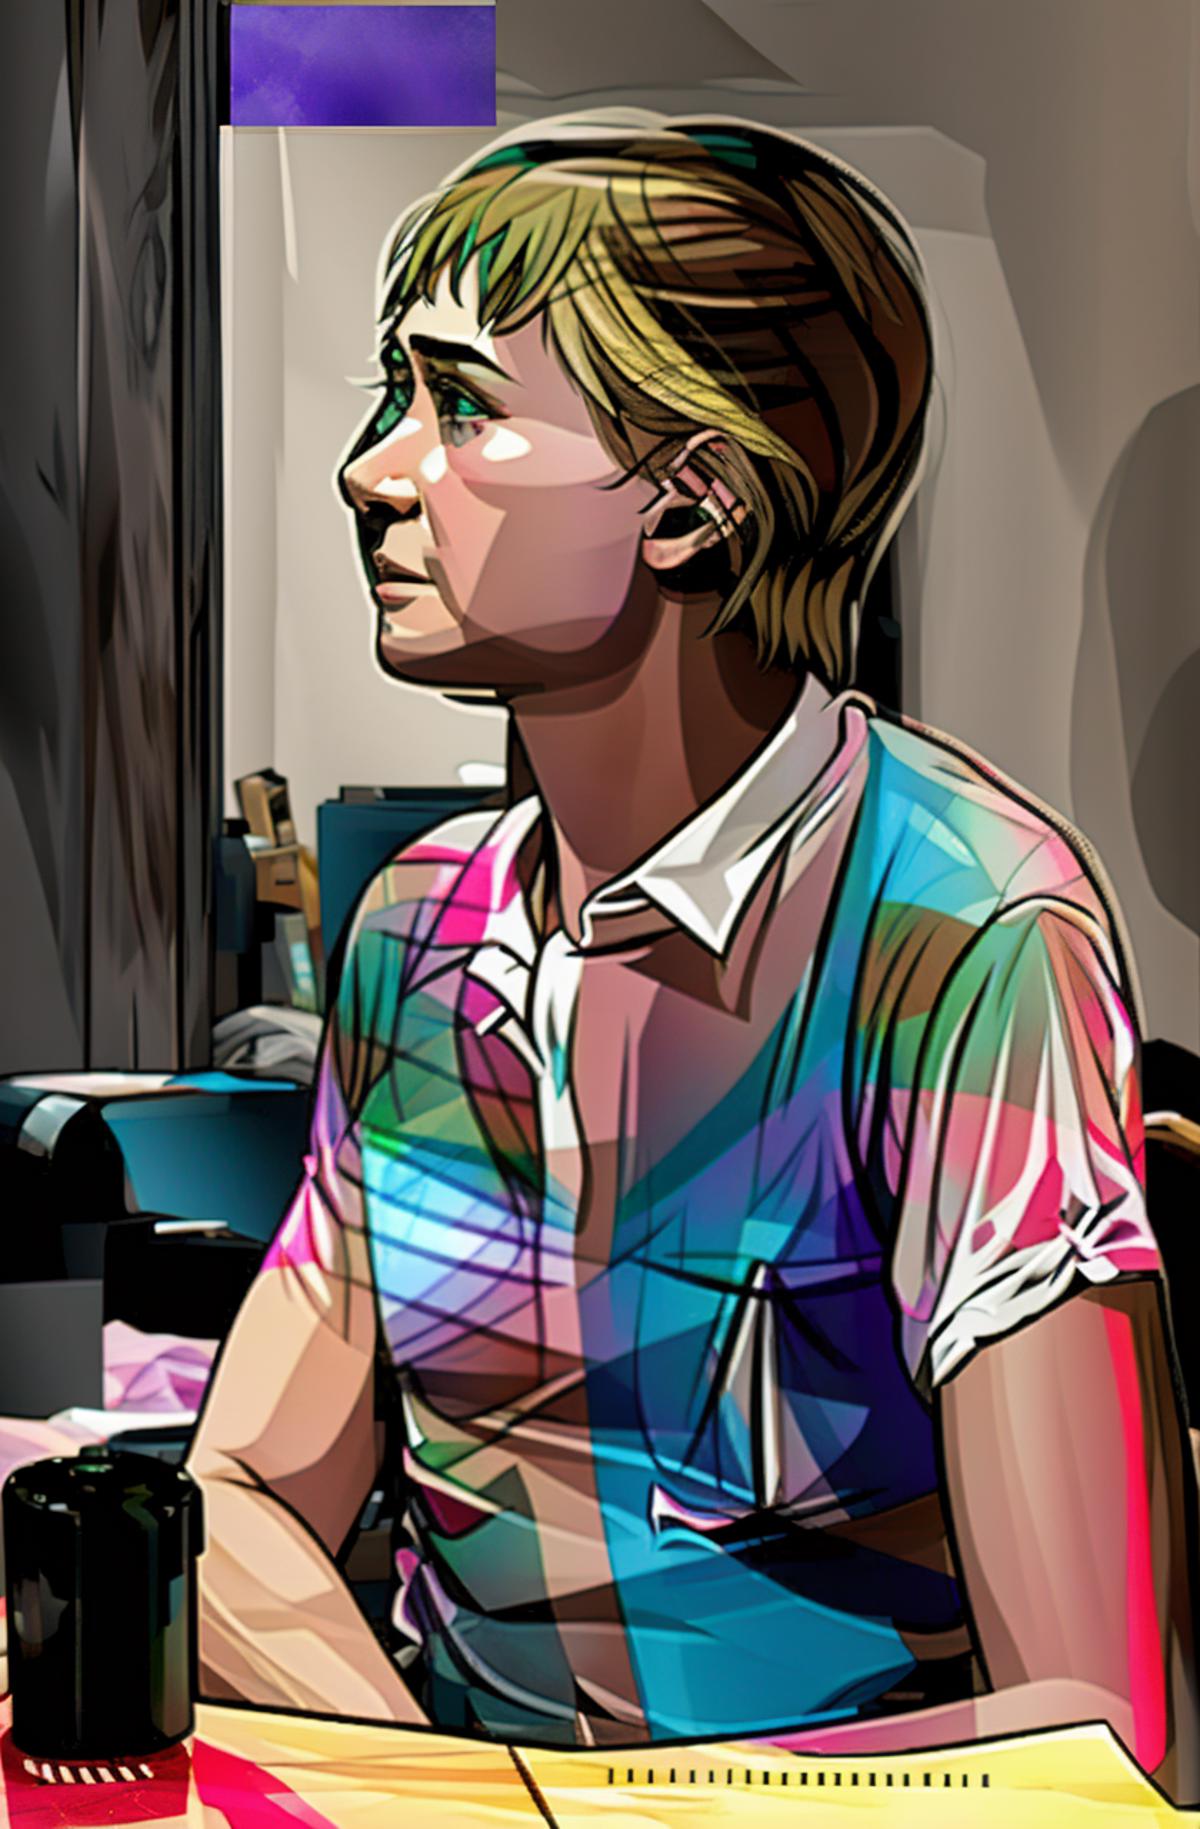 A Scanner Darkly Style image by Ciro_Negrogni